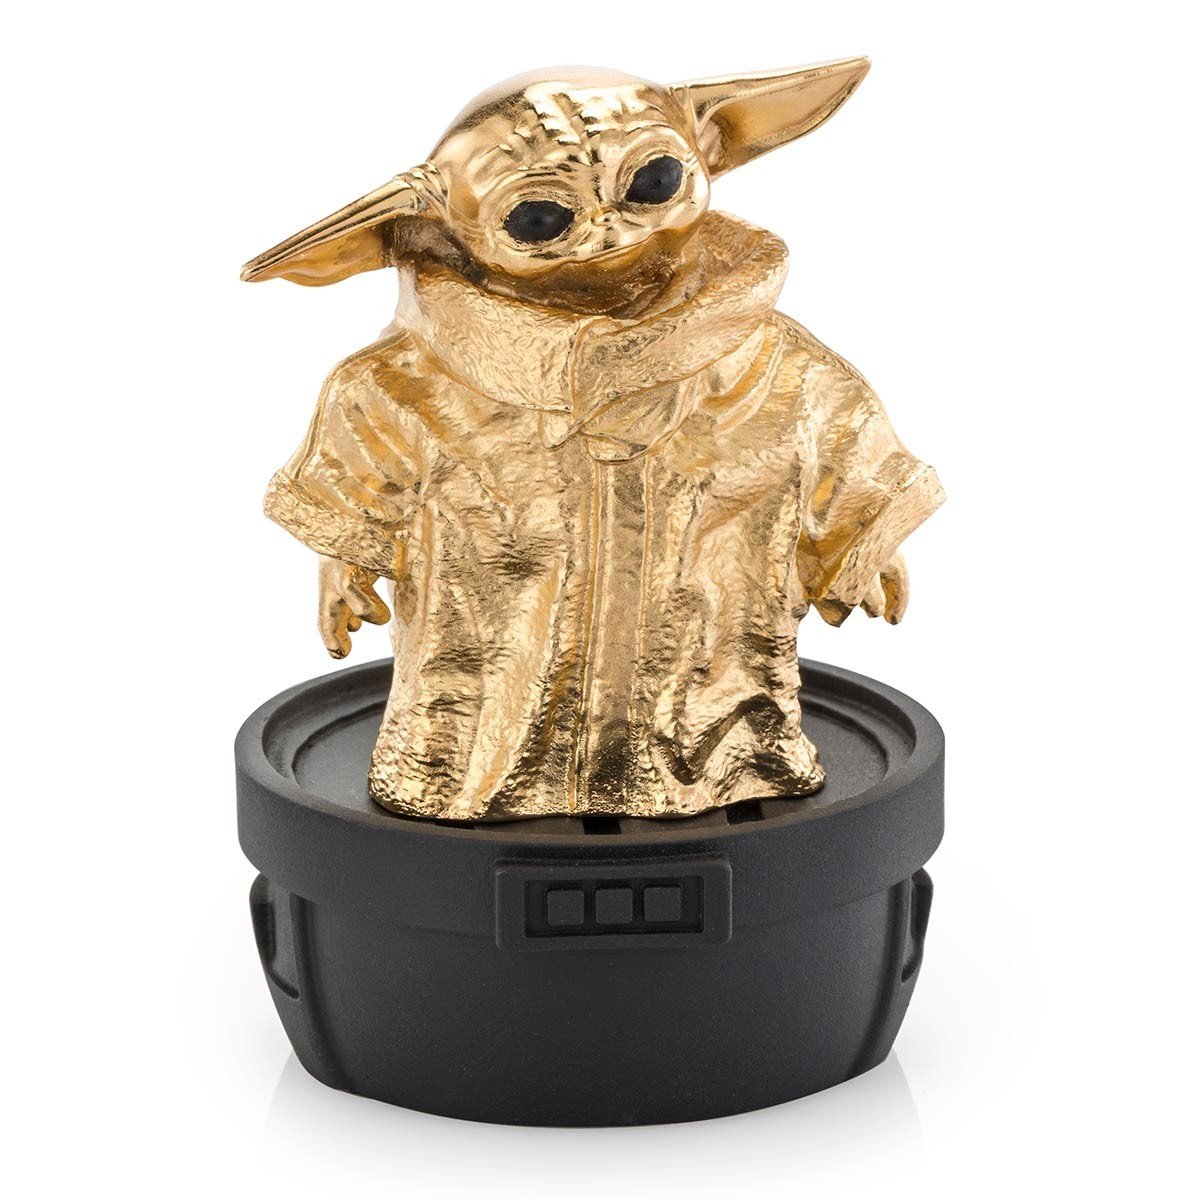 Star Wars Gold Grogu Limited Edition Figurine - Collectible Gift